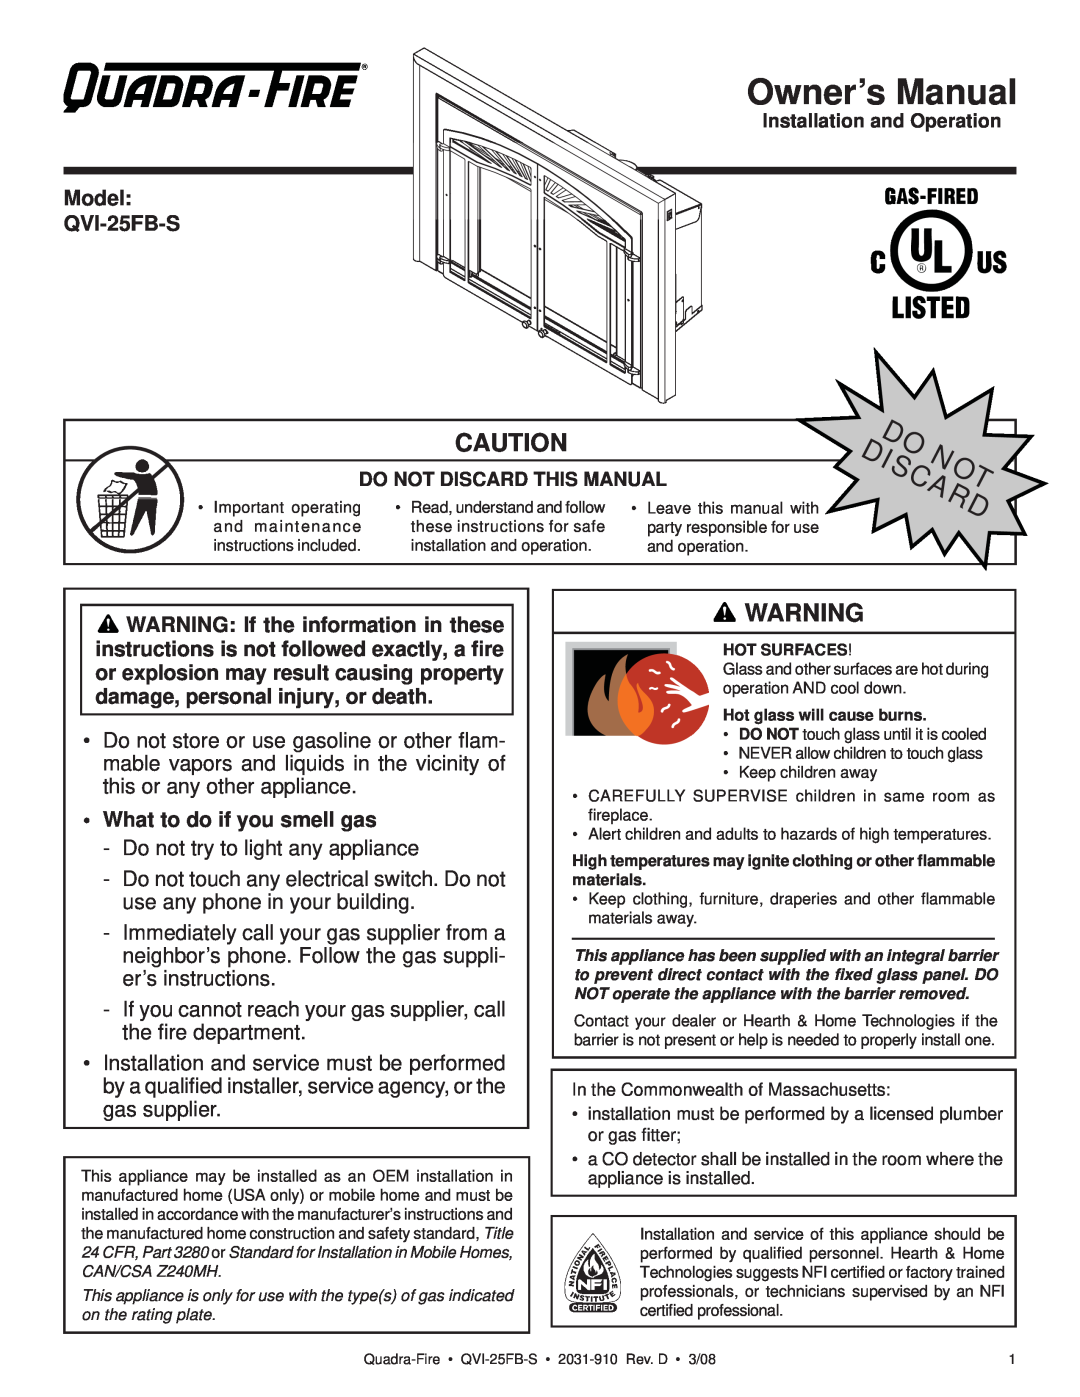 Quadra-Fire owner manual Model QVI-25FB-S, What to do if you smell gas 